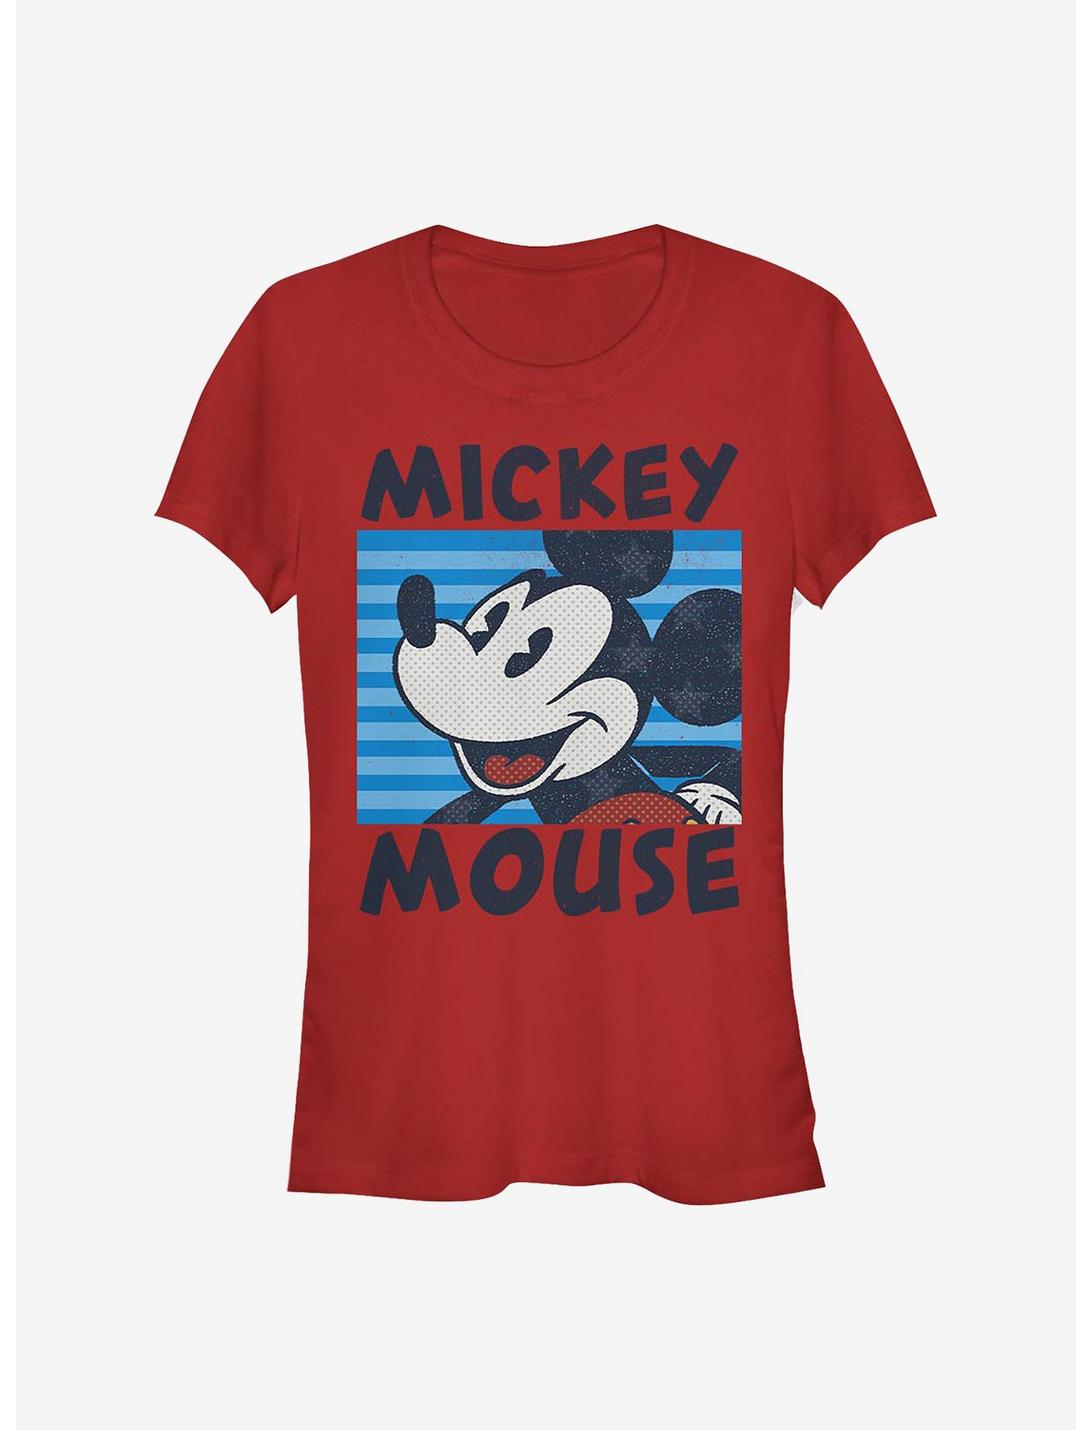 Disney Mickey Mouse Mickey's Stripes Girls T-Shirt, RED, hi-res